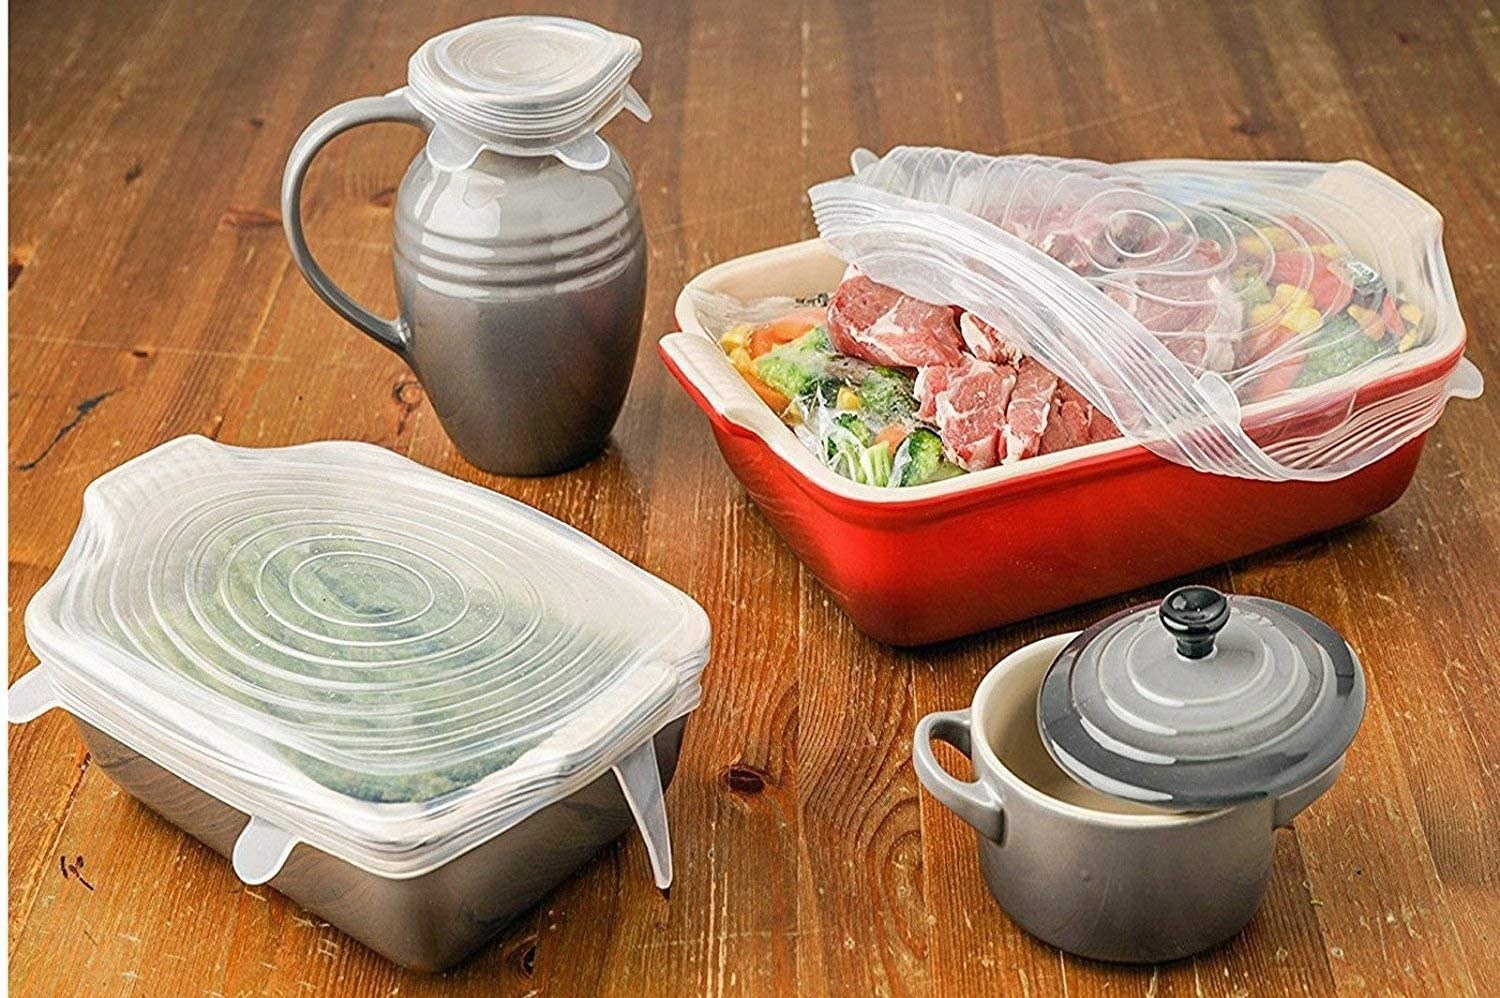 Various containers with stretchy lids over them